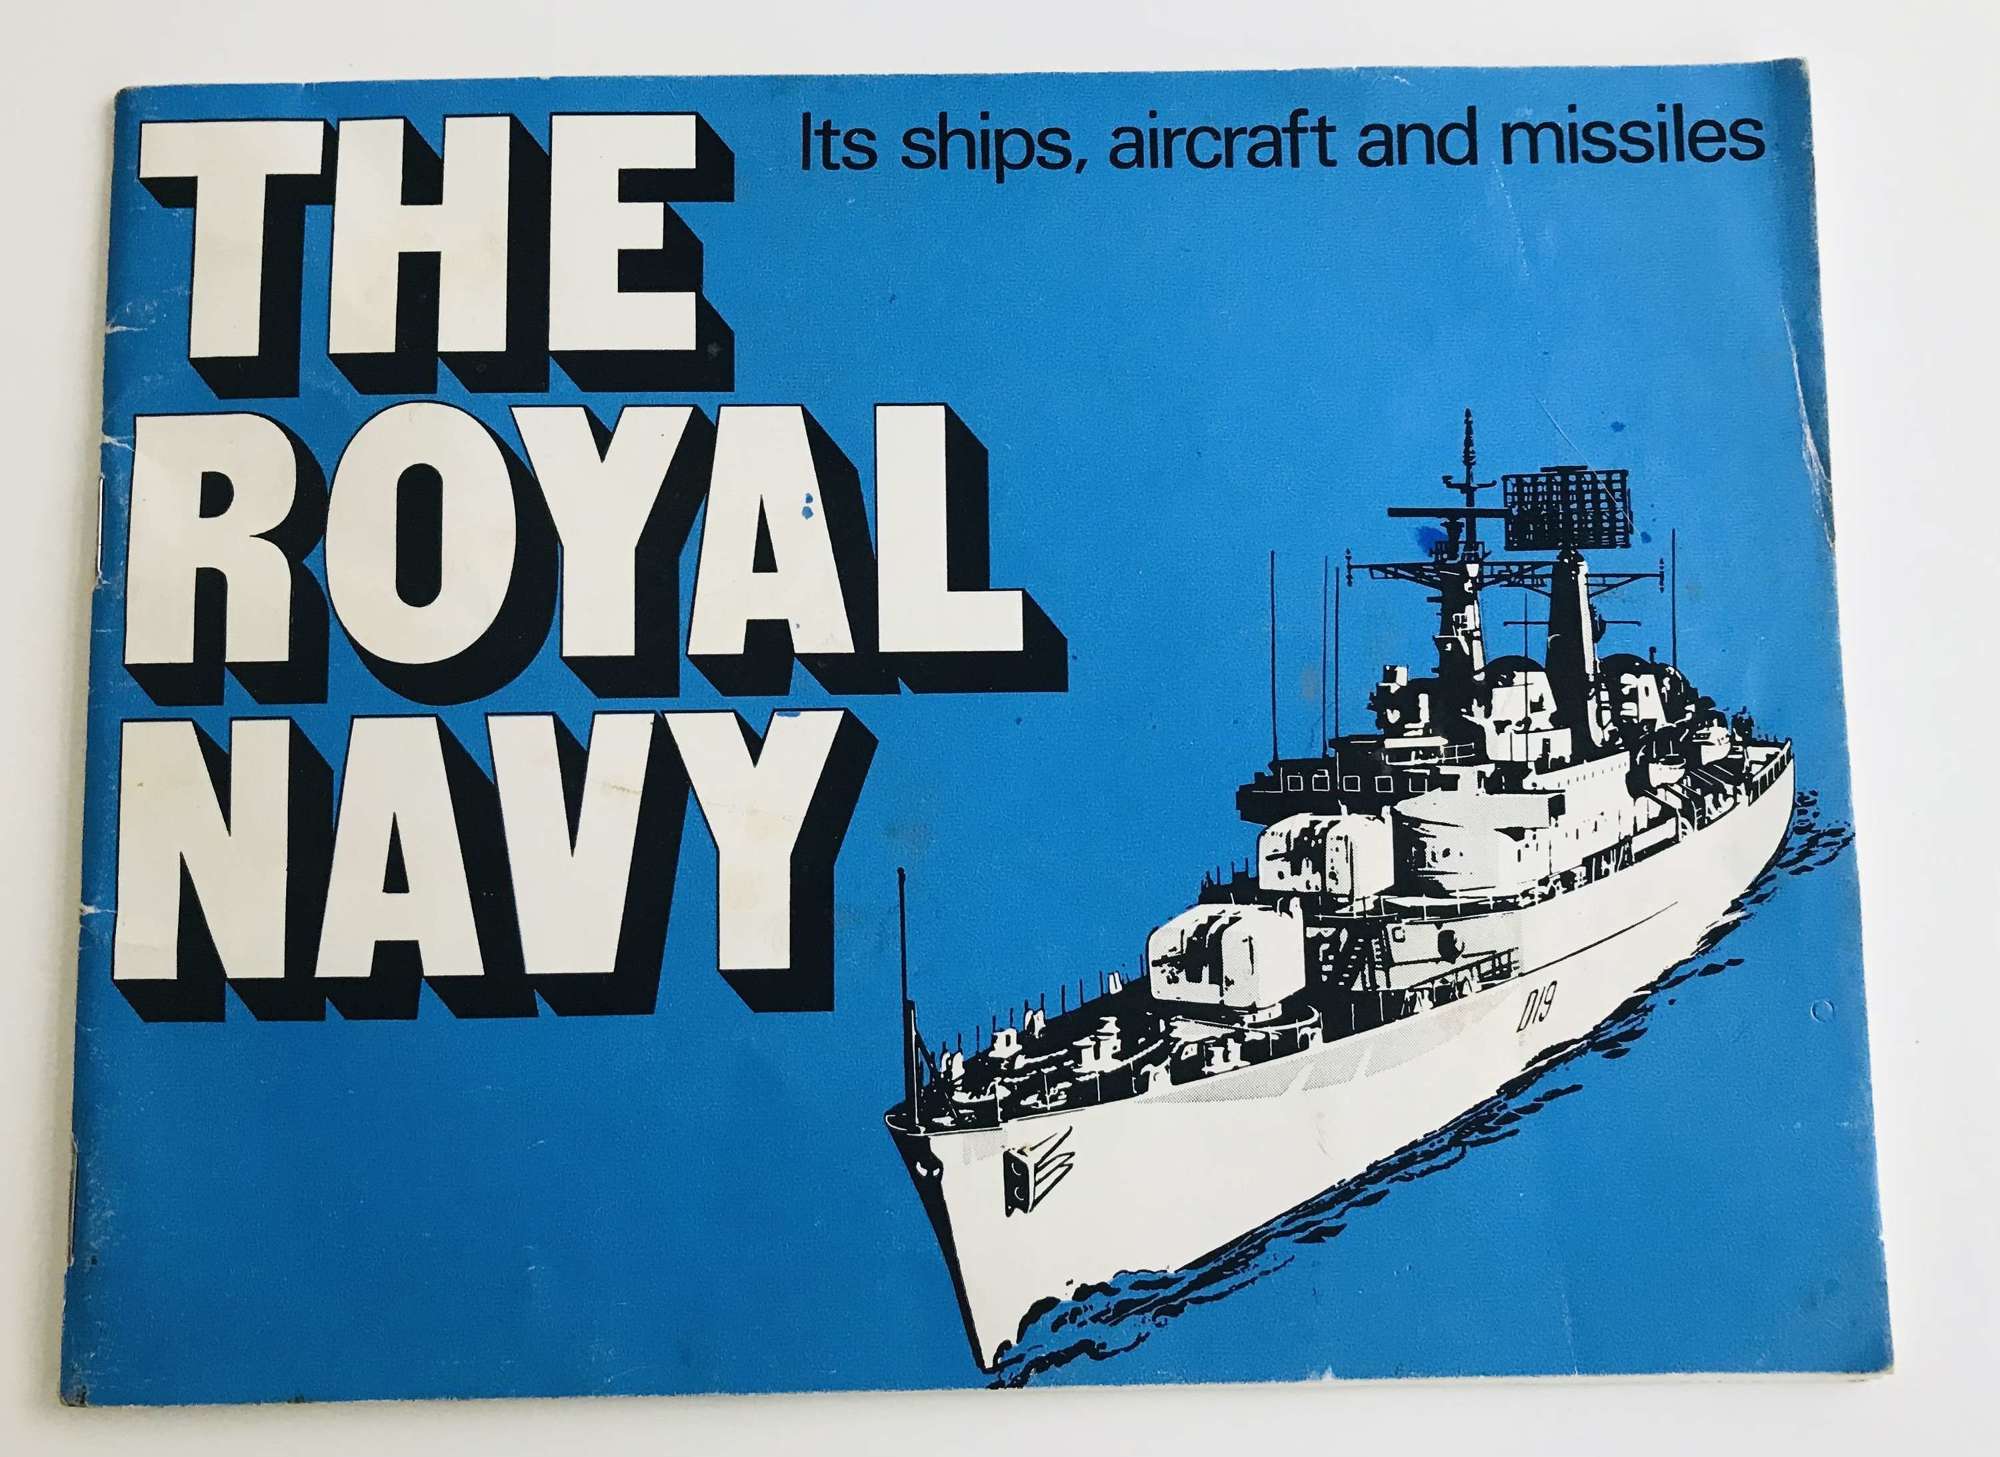 Royal Navy publicity booklet dated January 1970